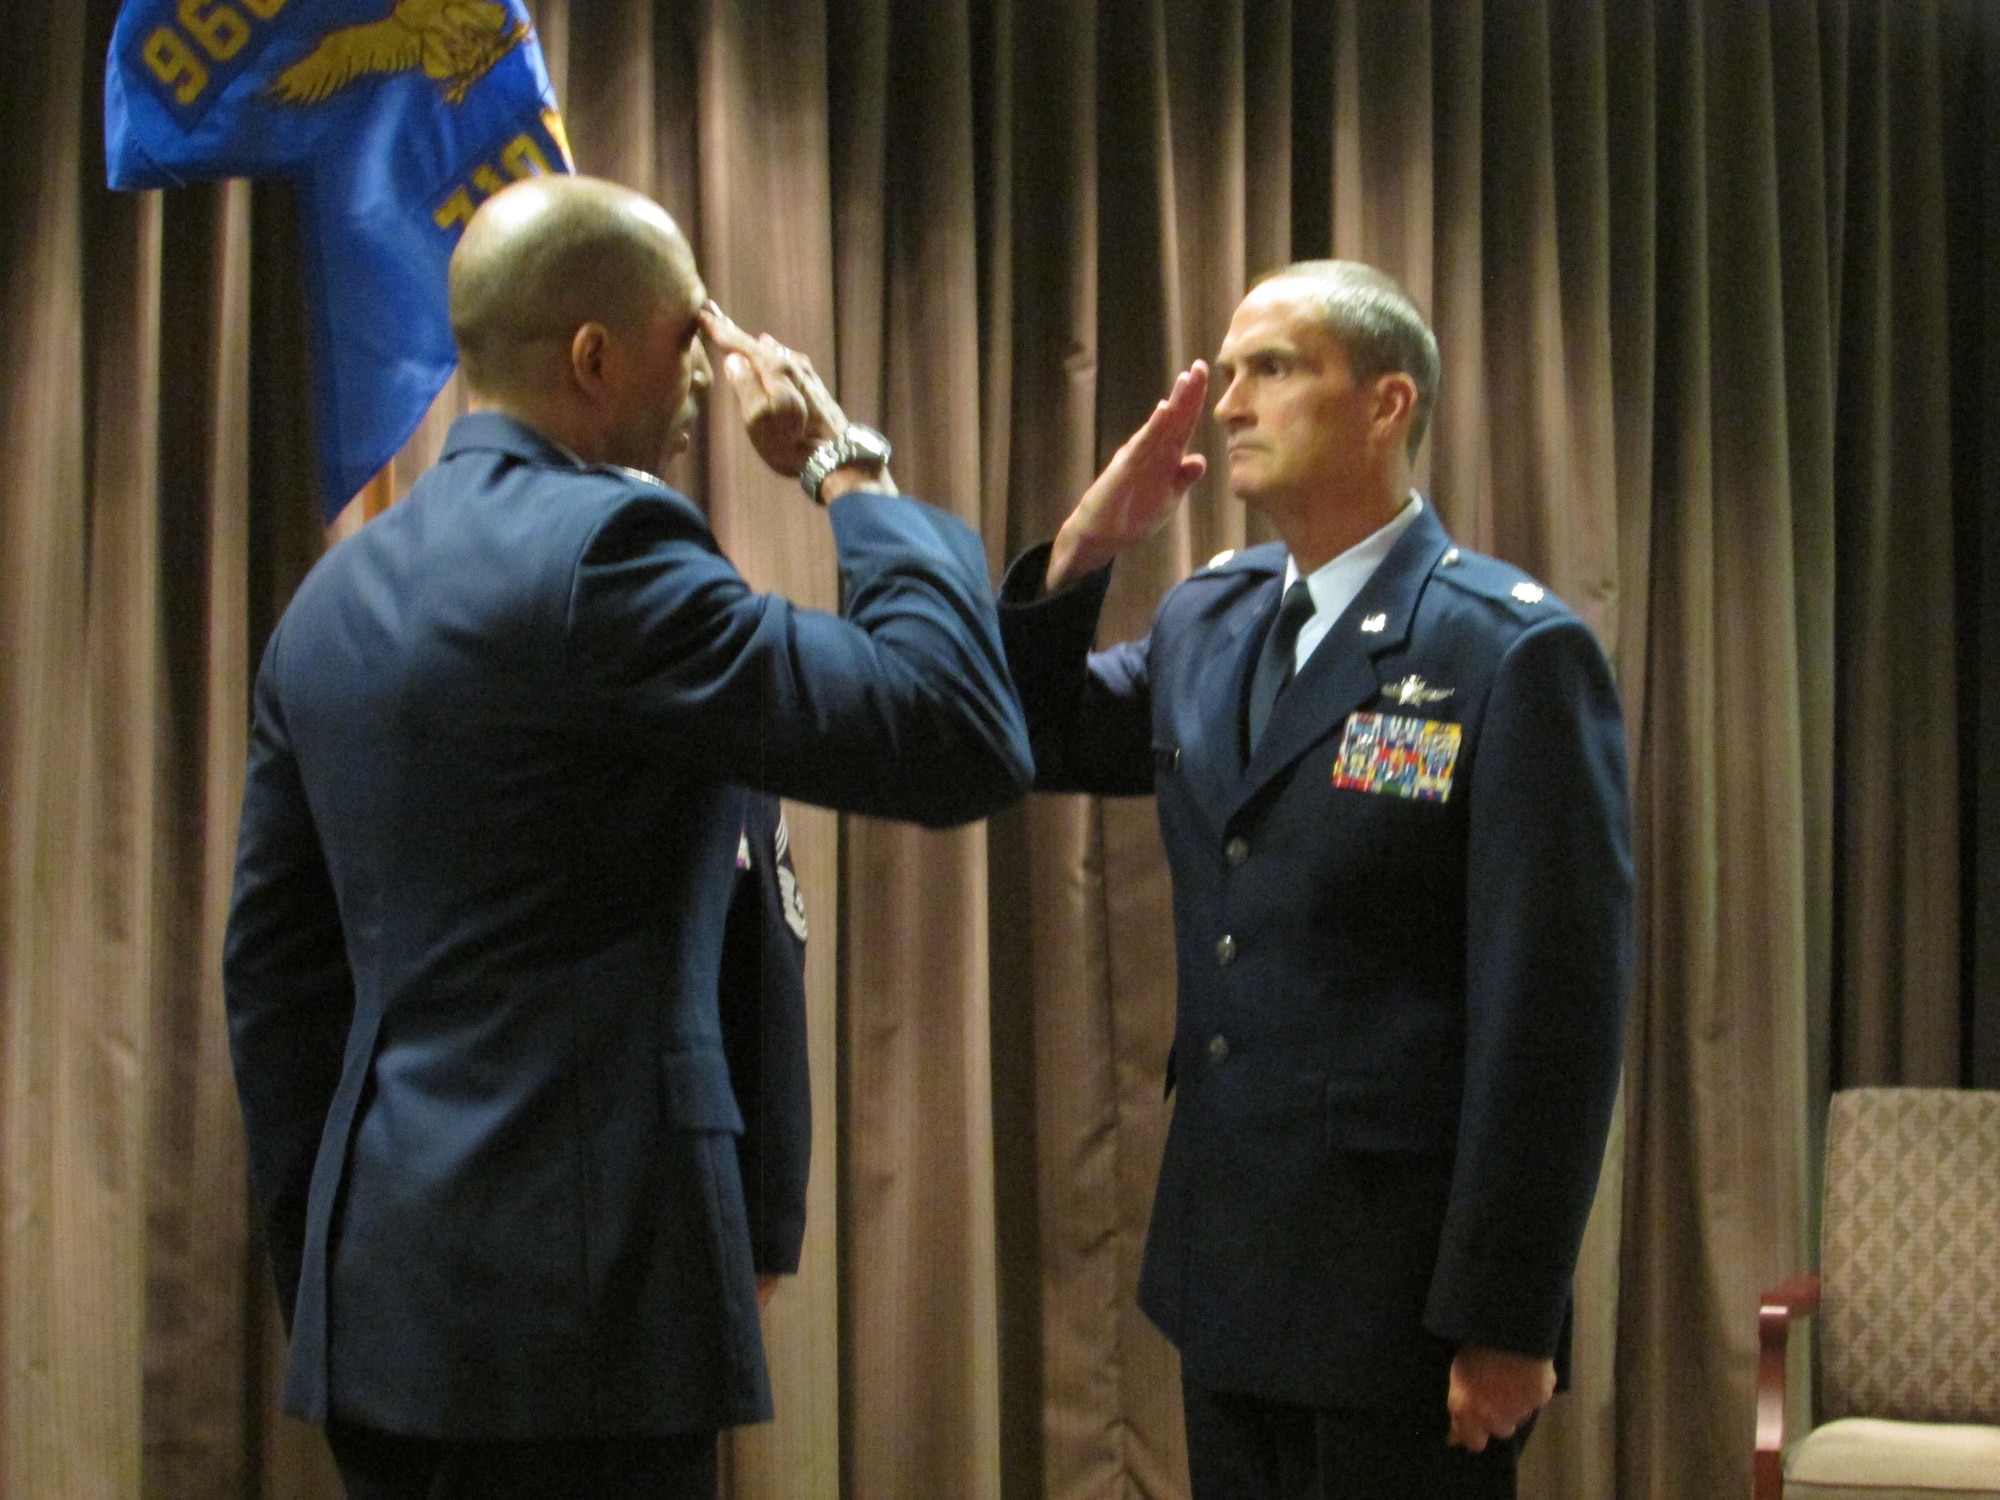 Col. Anthony M. Perkins, 960th Cyberspace Operations Group commander, and Maj. Karl Miller, 710th Network Operations Squadron commander, exchange salutes during an activation ceremony at Robins Air Force Base, Ga., Nov. 6. Miller assumed command of the unit, as its first commander. (U.S. Air Force photo by 2nd. Lt. Michael Wisniewski)